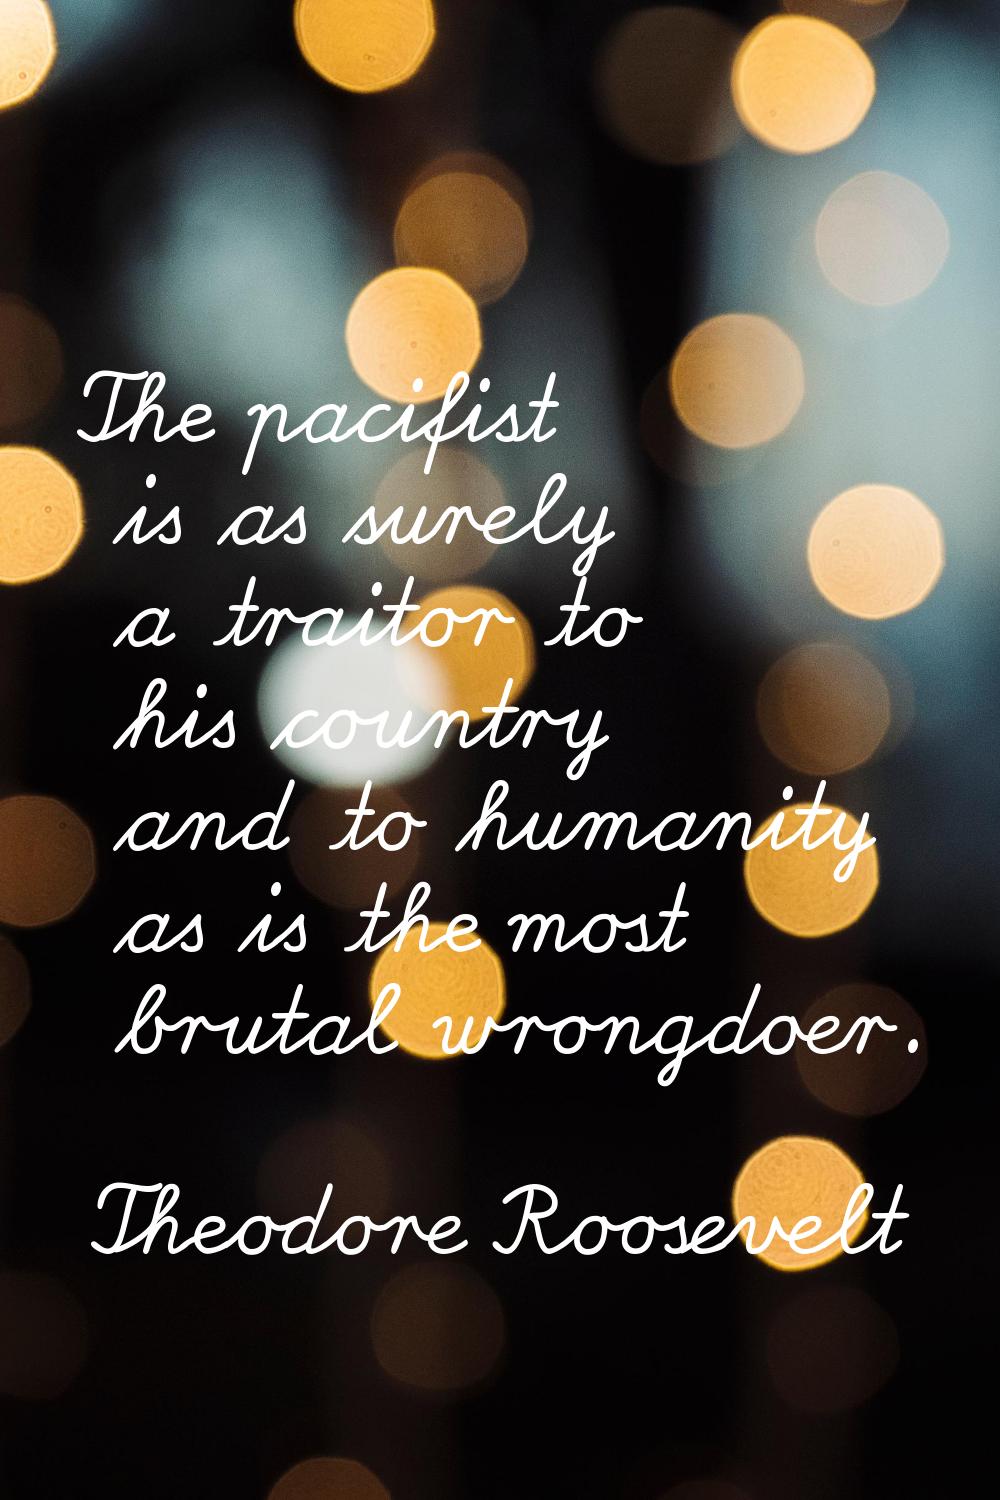 The pacifist is as surely a traitor to his country and to humanity as is the most brutal wrongdoer.